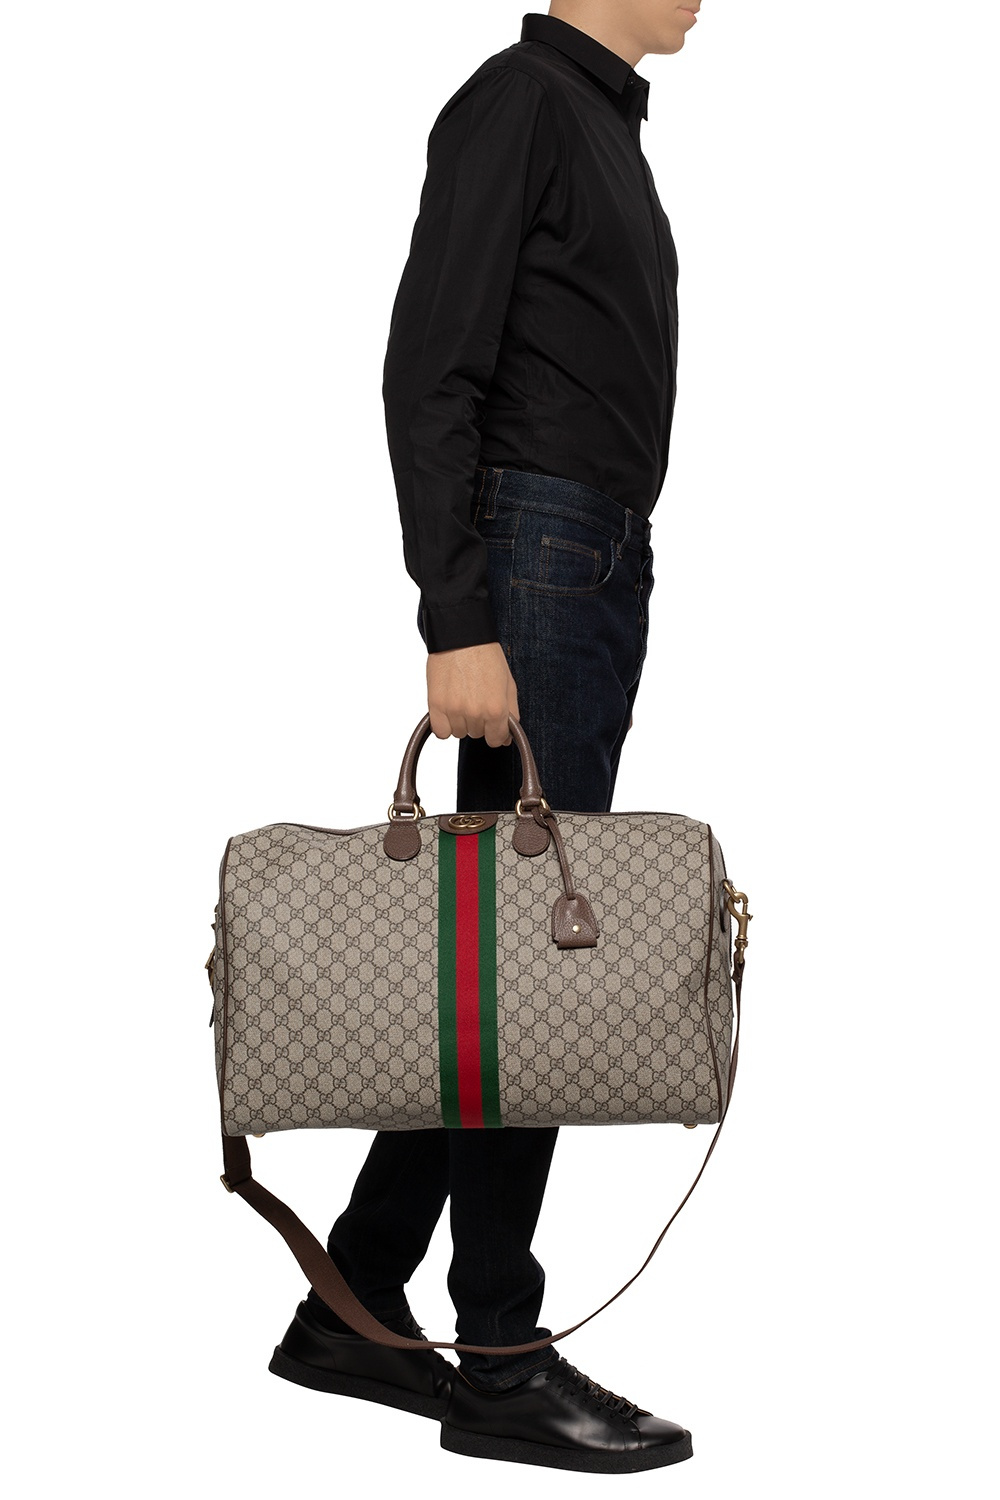 gucci Baby ‘Ophidia’ holdall bag